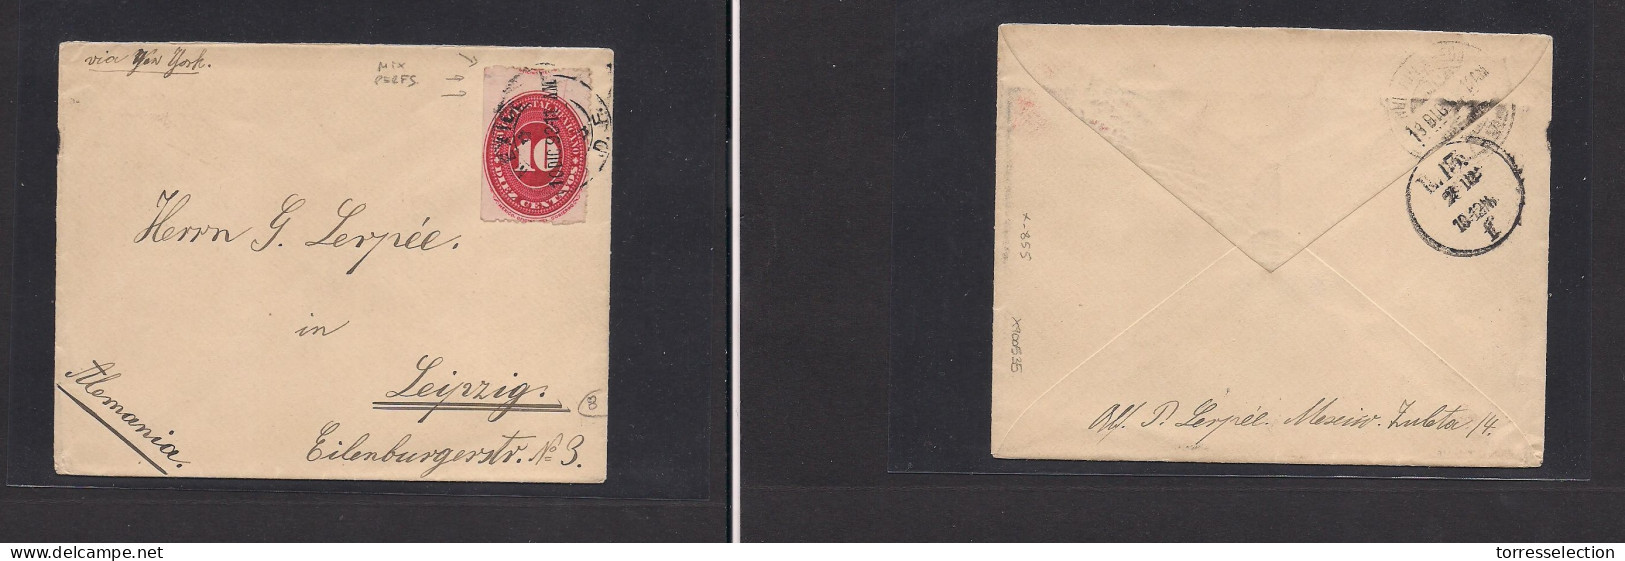 MEXICO. Mexico - Cover - 1893 DF To Lepizig  Germany Frkd Env Lare Numeral Prforation Varietty, Interesting And Rare. Ea - México